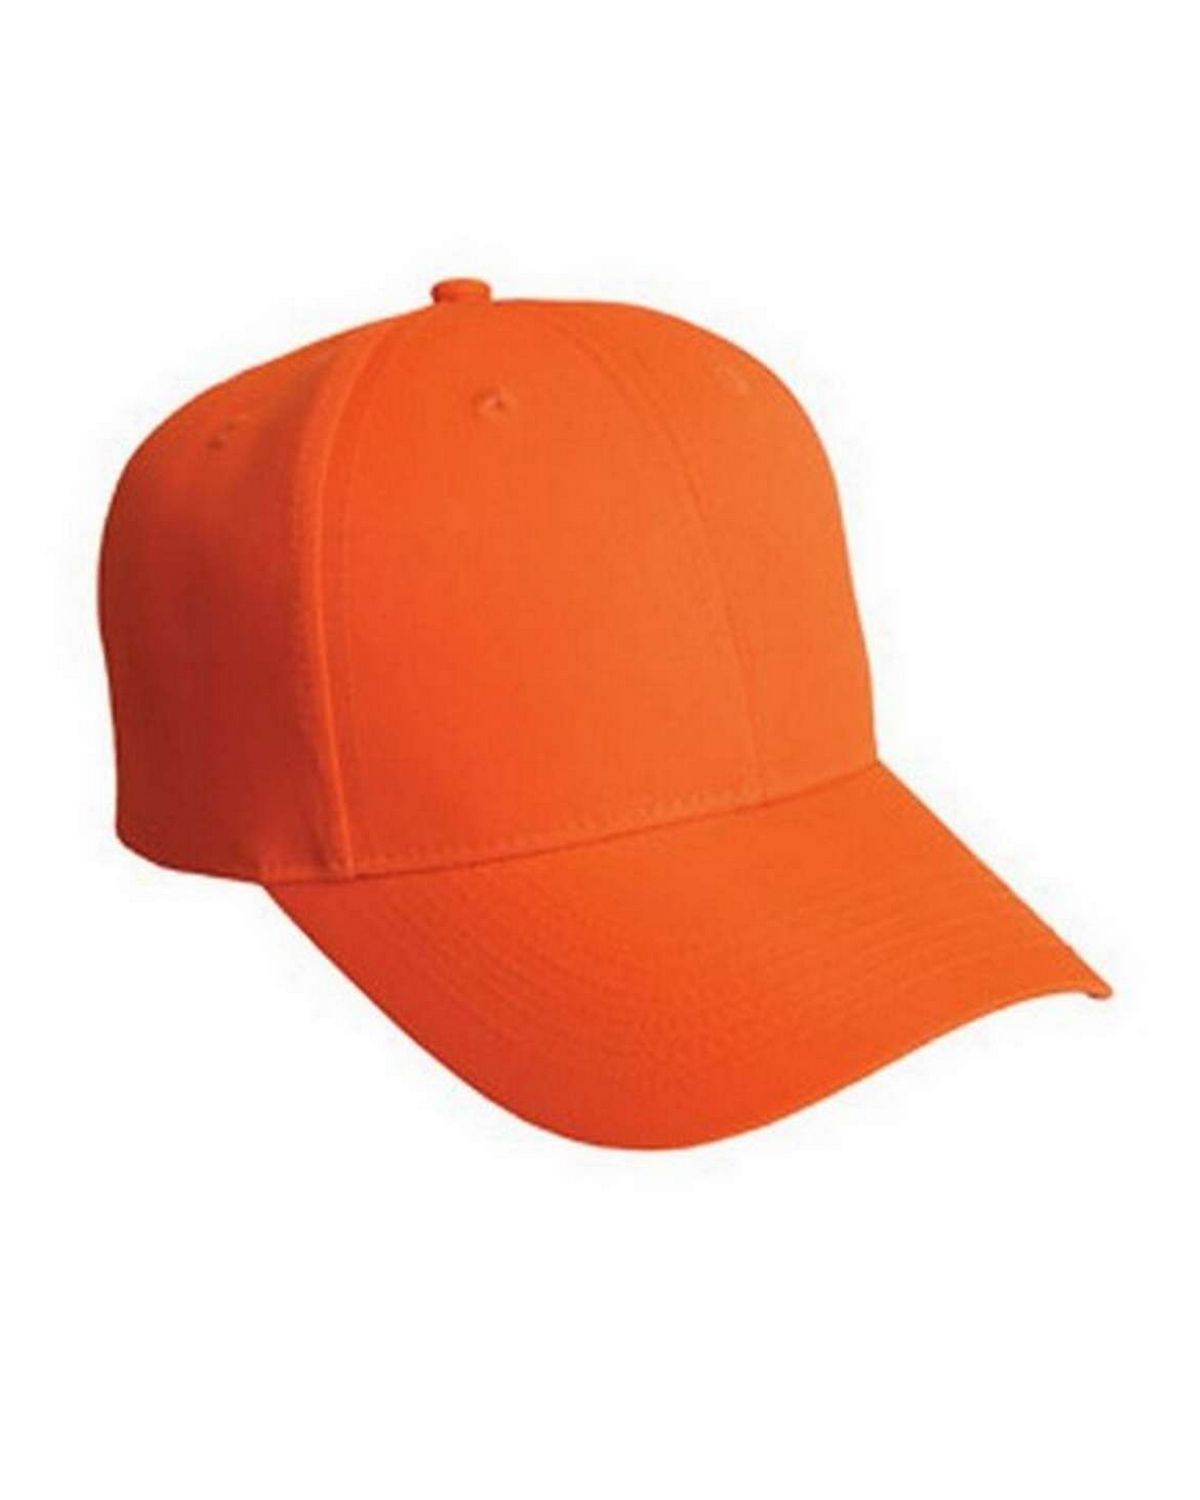 Port Authority C806 Solid Safety Cap - Shop at ApparelnBags.com